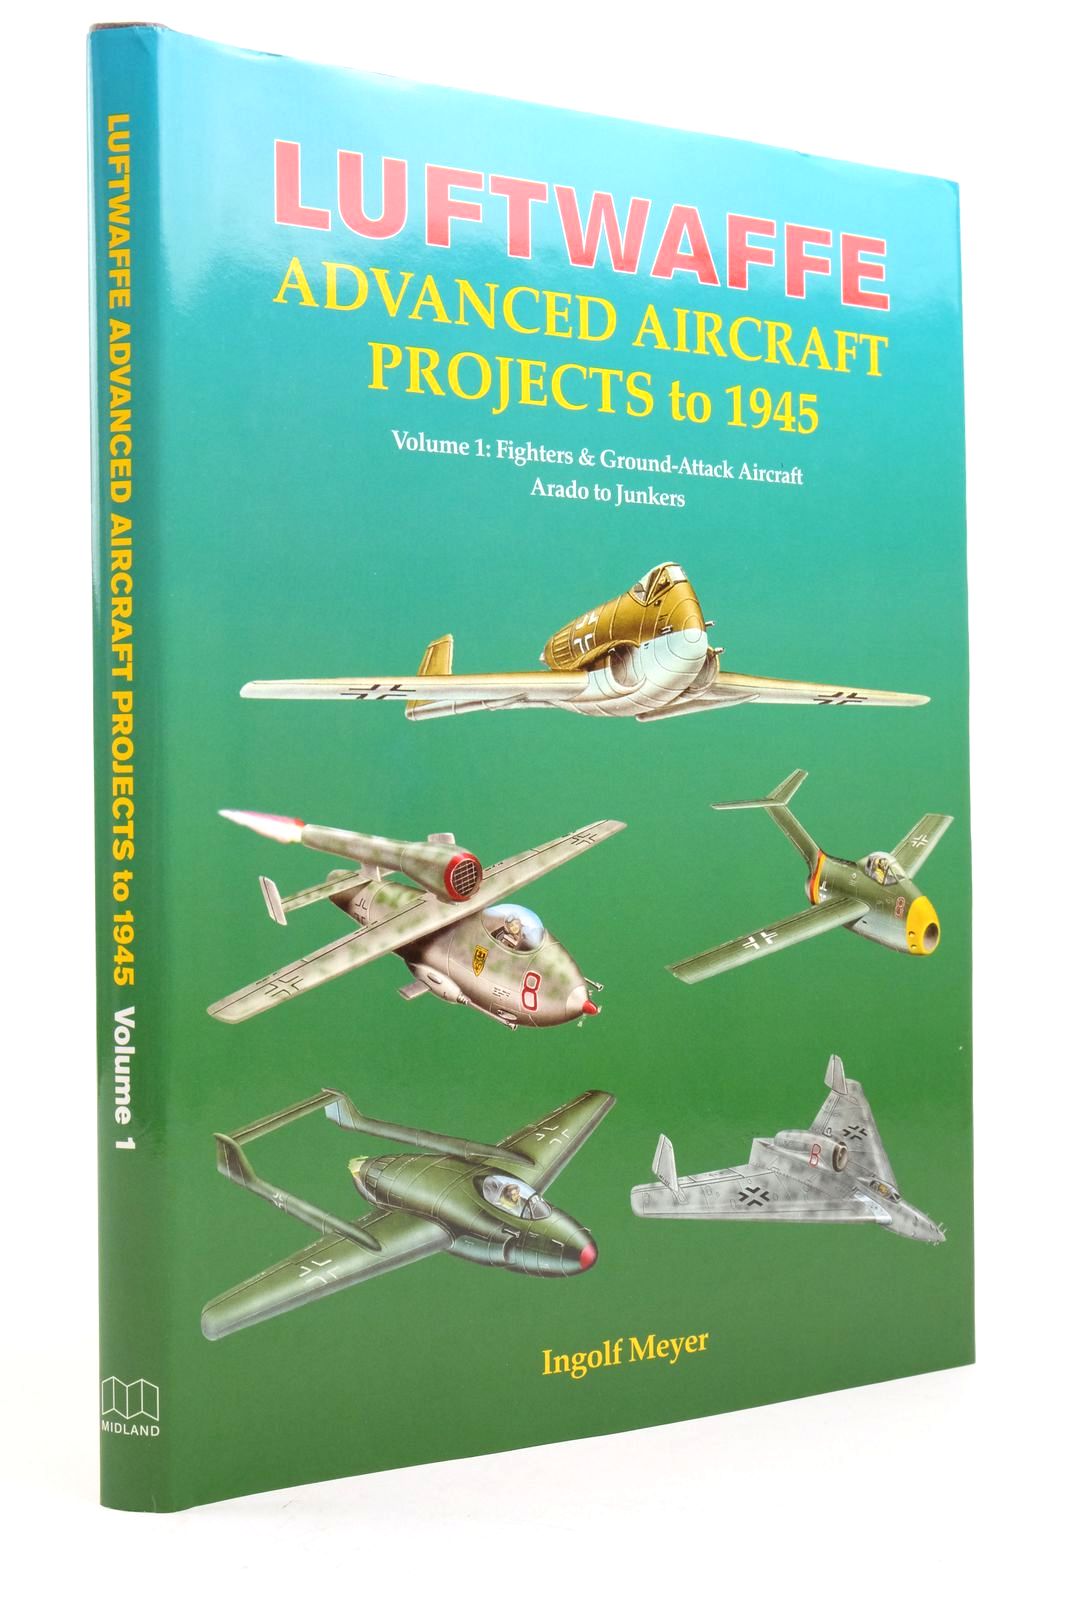 Photo of LUFTWAFFE ADVANCED AIRCRAFT PROJECTS TO 1945 VOLUME 1 written by Meyer, Ingolf published by Midland Publishing (STOCK CODE: 2138578)  for sale by Stella & Rose's Books